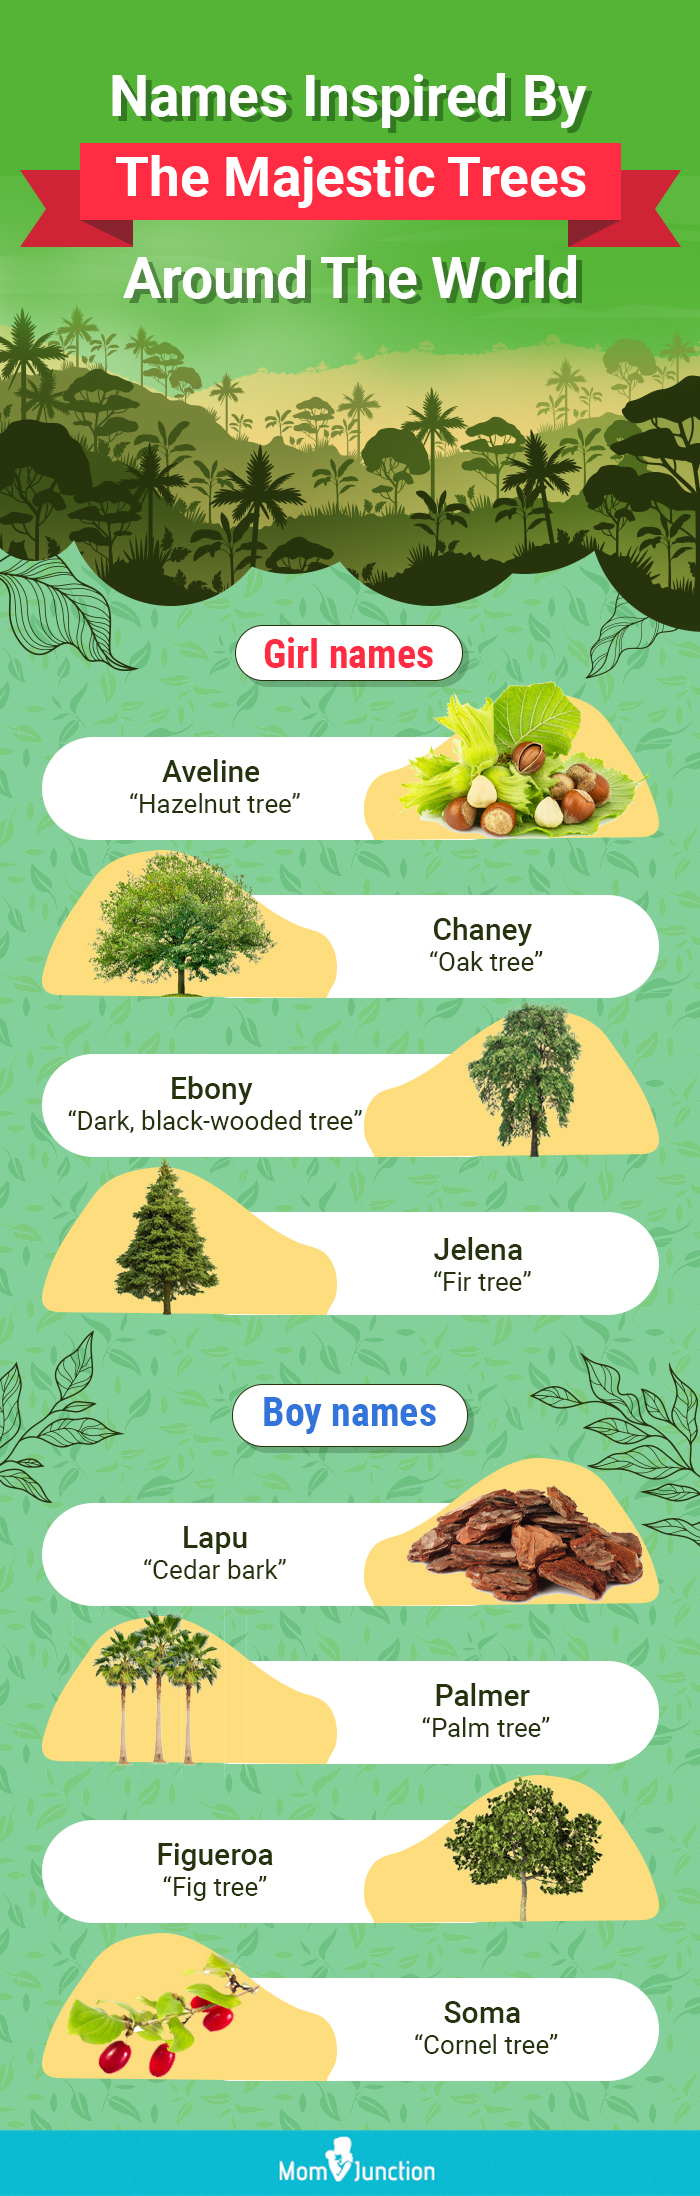 majestic trees baby names (infographic)